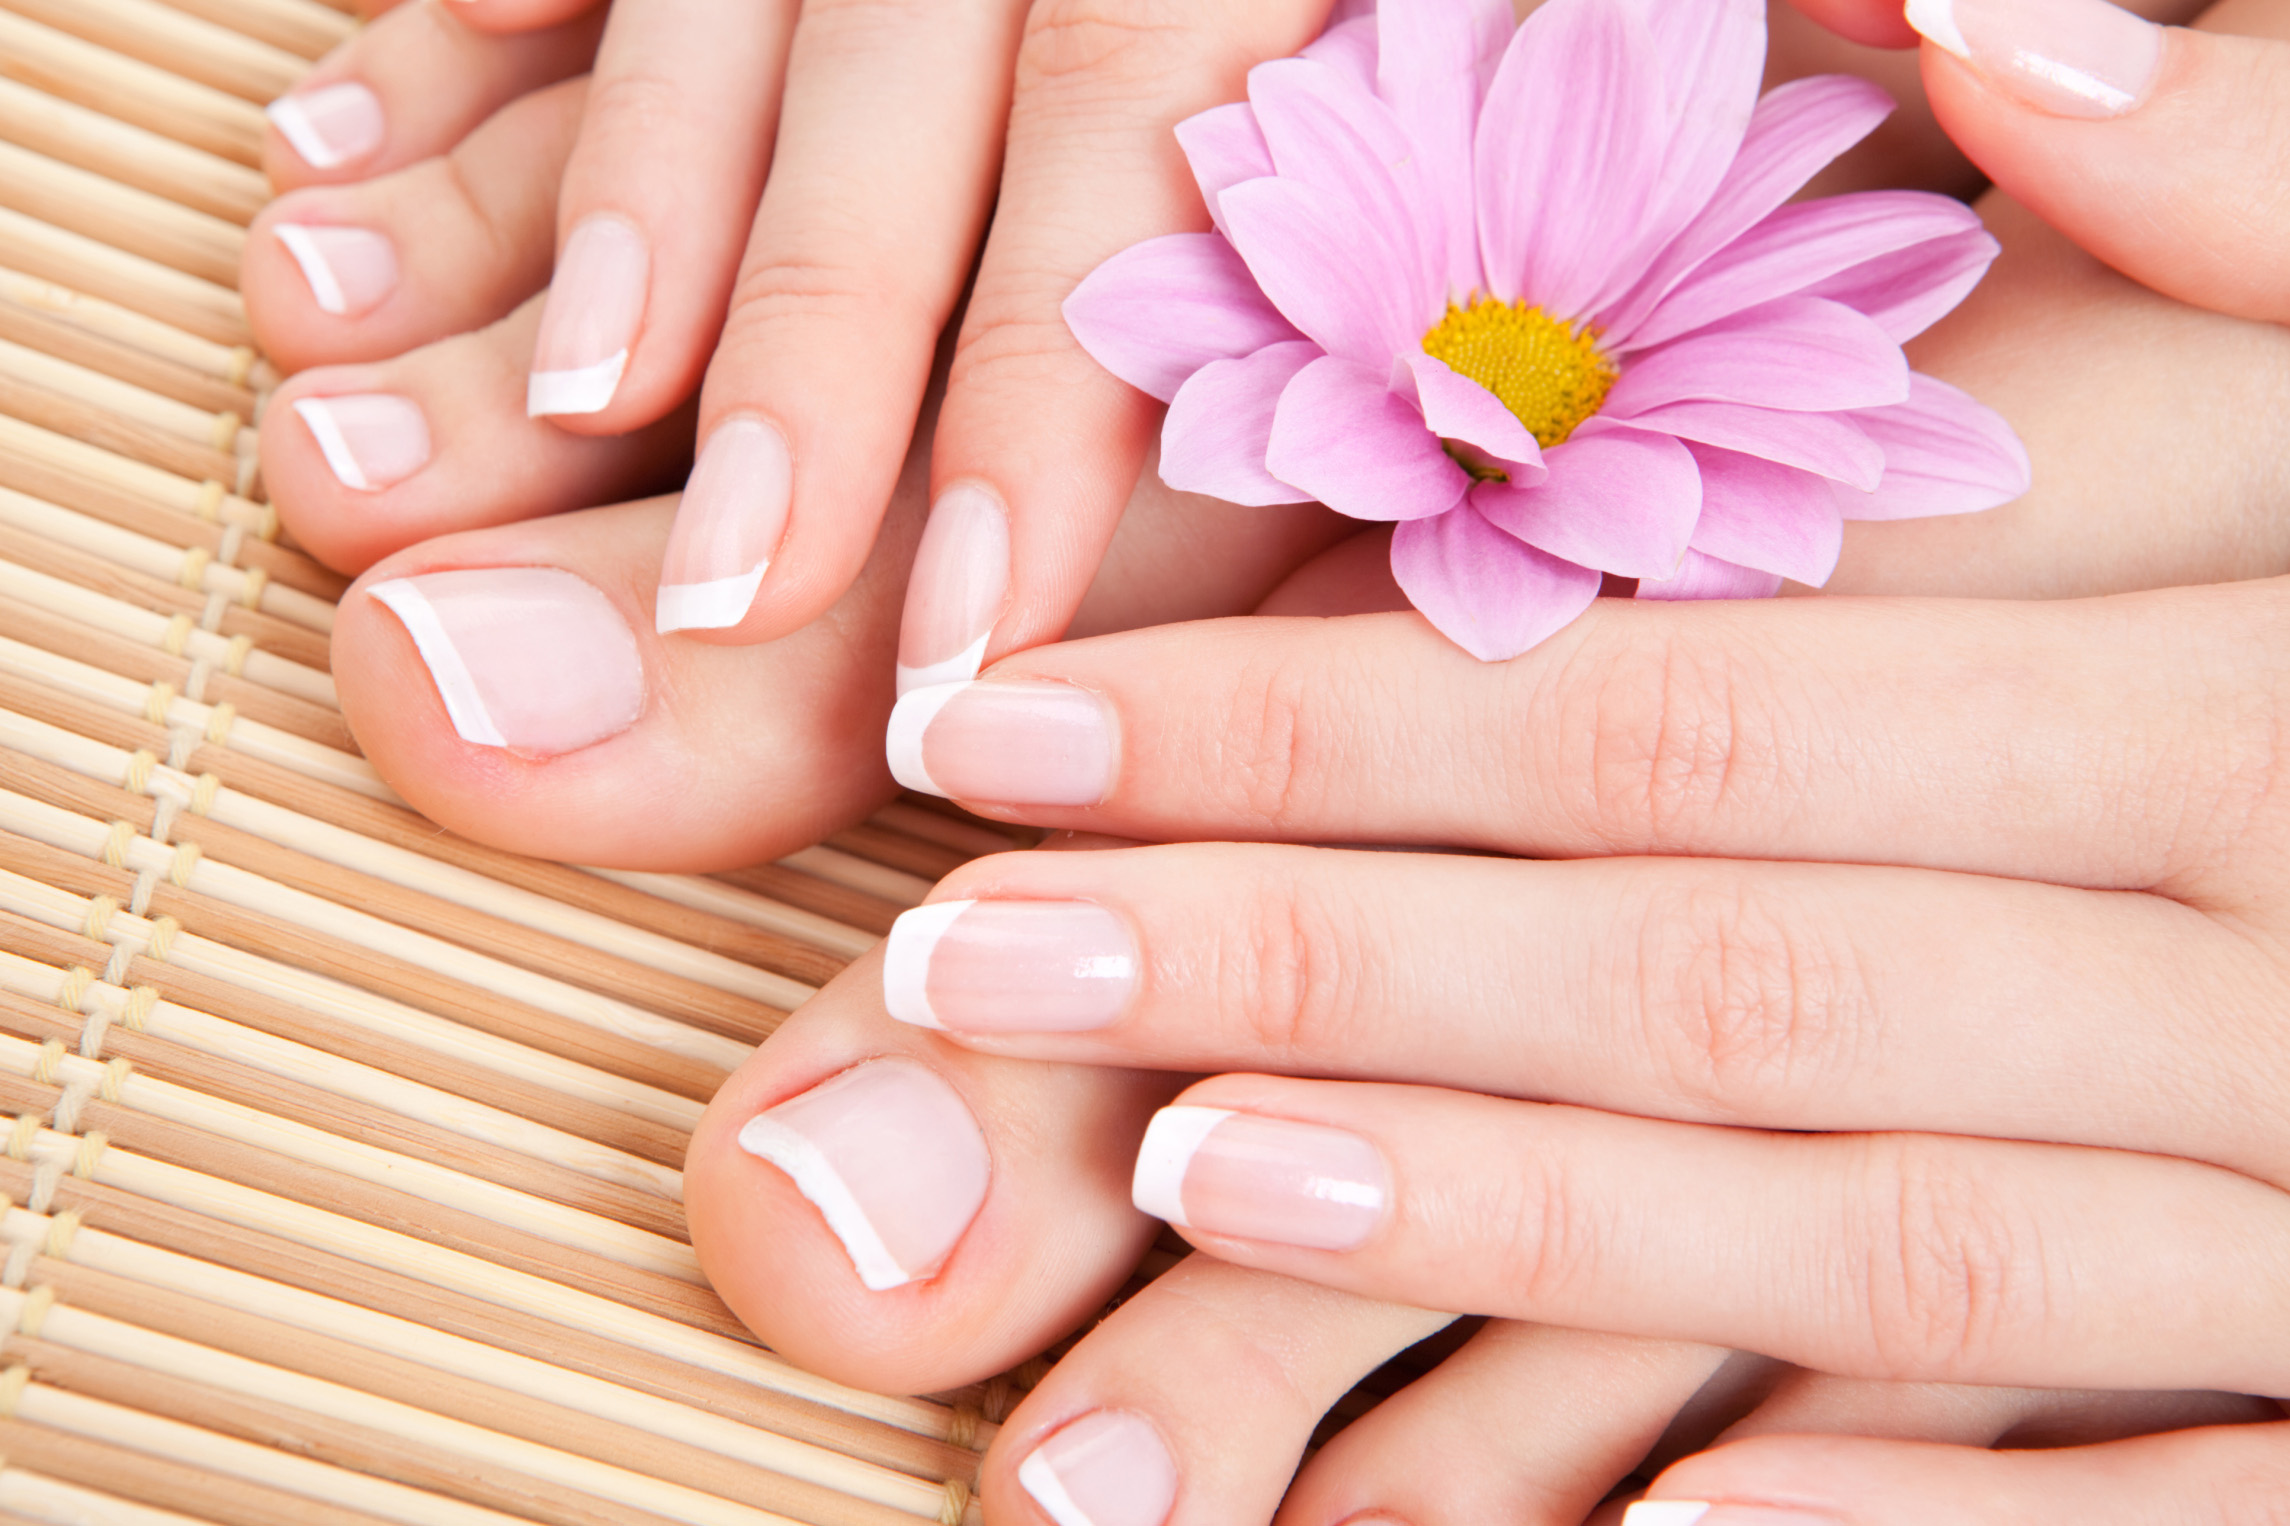 4. Nail Care Background Design Tips - wide 1